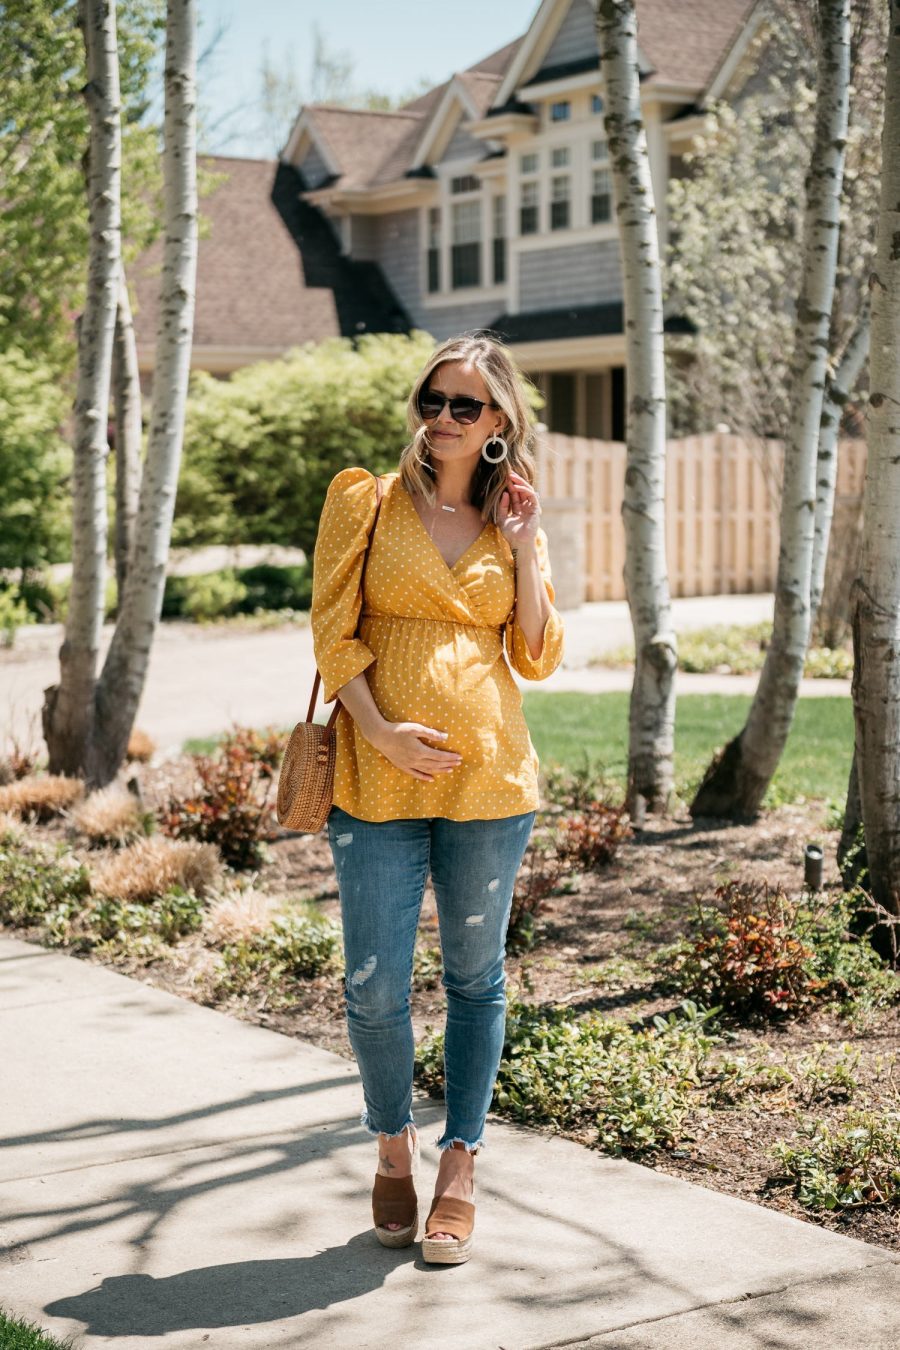 The perfect yellow maternity top, jeans, and espadrille wedges